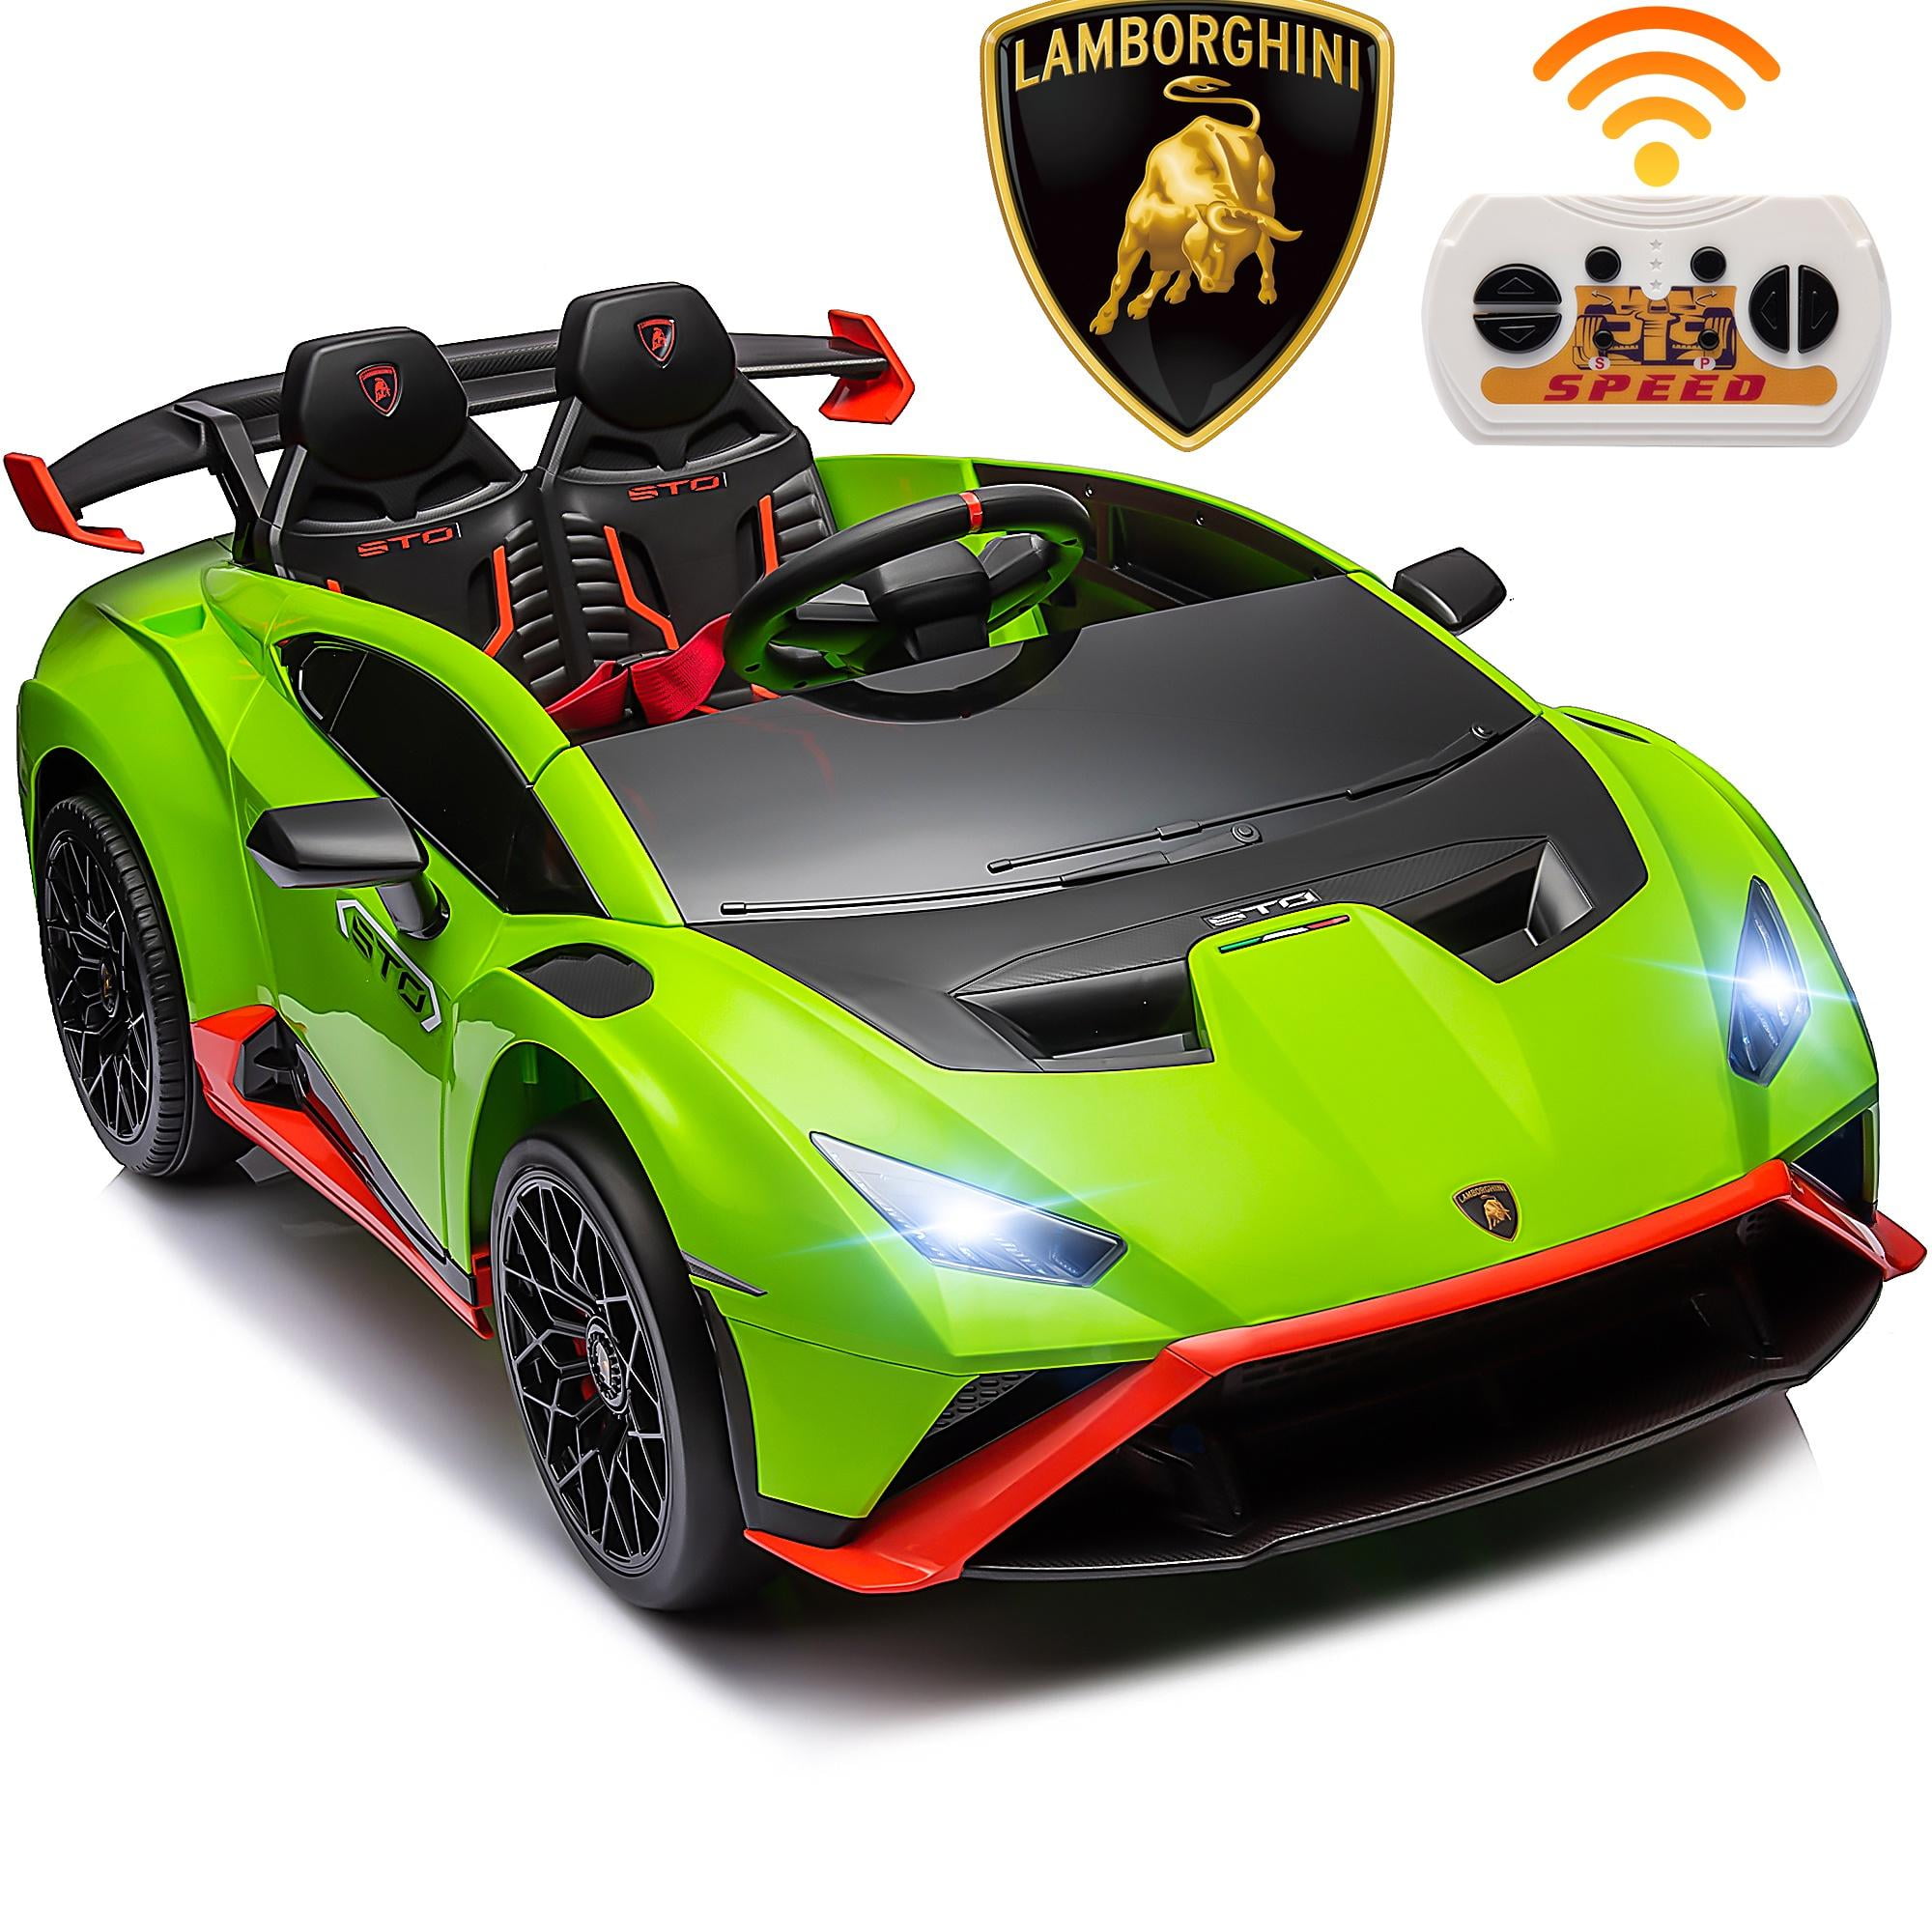 iRerts Green 24V Lamborghini Huracan Sto Powered Ride On Cars with Remote Control, Kids Ride on Trucks for Boys Girls Gifts, Ride on Toys with Bluetooth, USB Ports, Music, LED Lights, 360° Spin, Drift